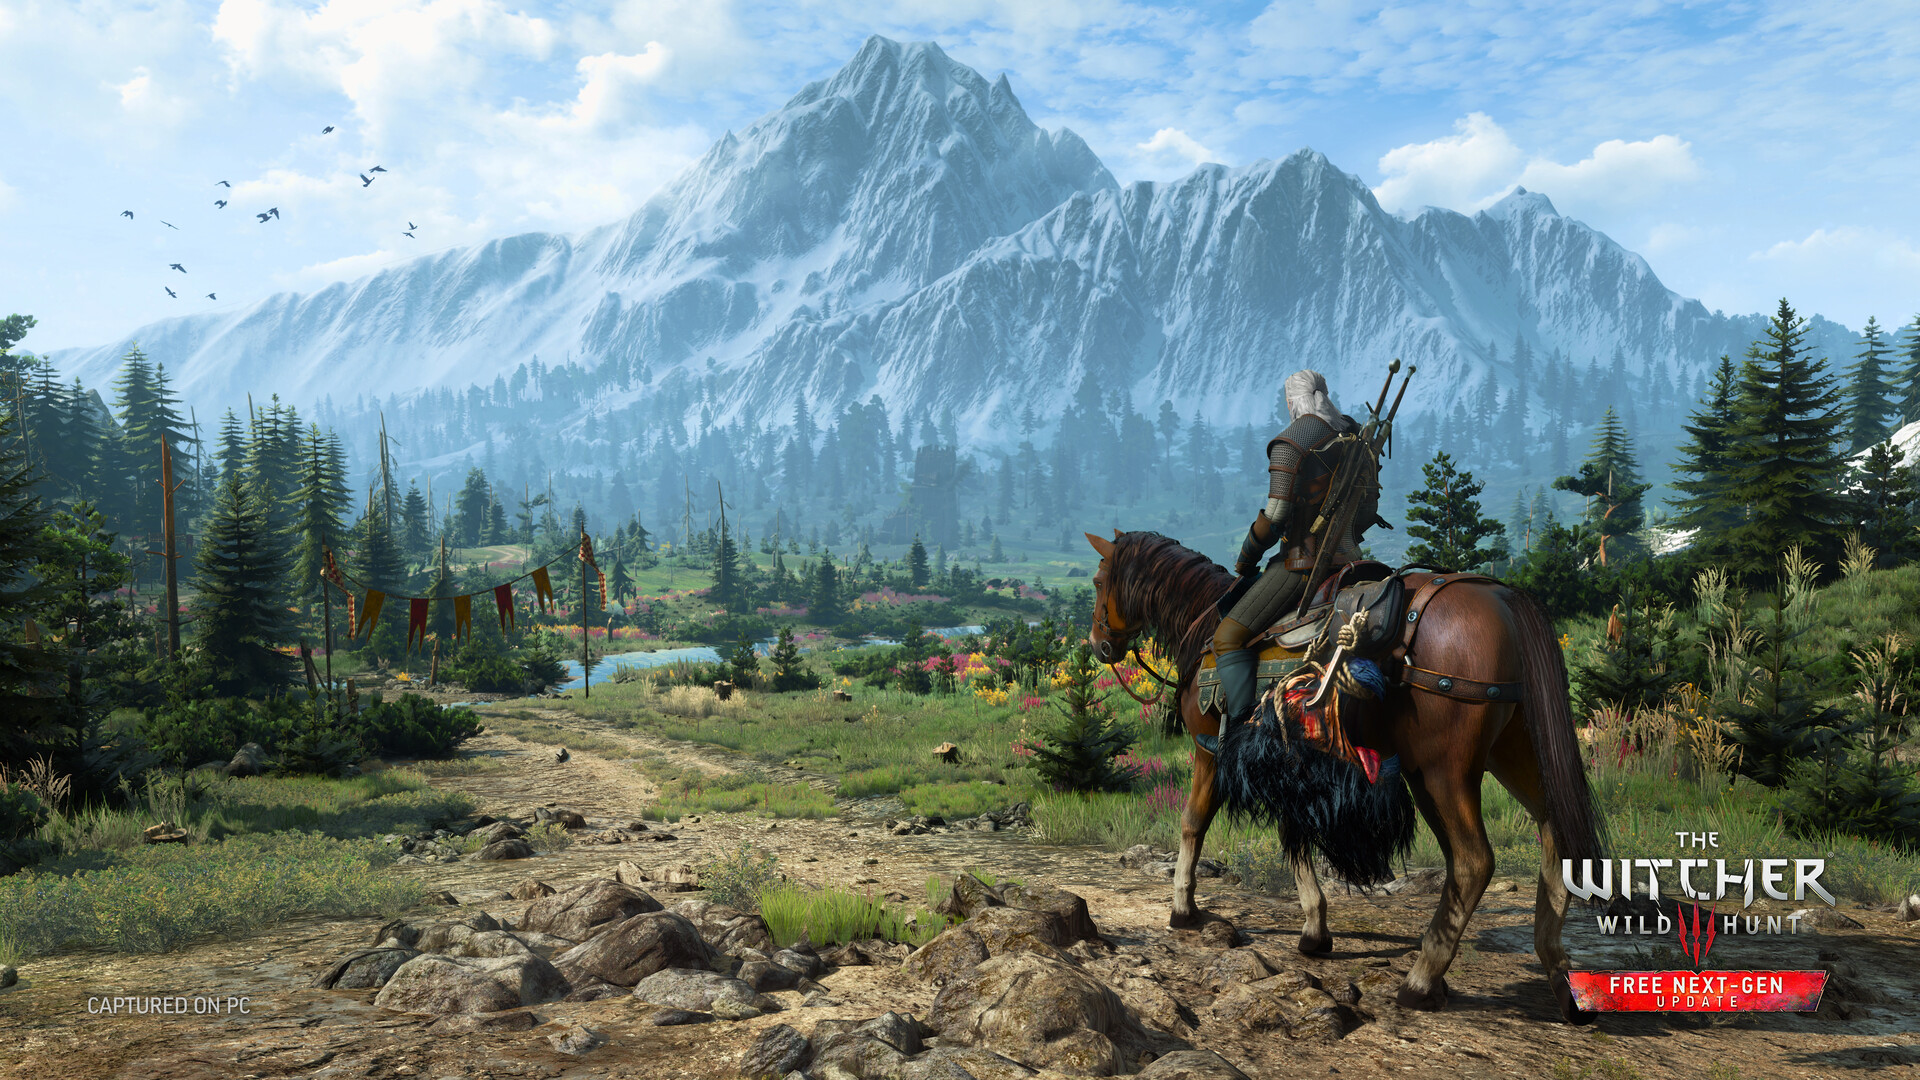 Save 70% on The Witcher® 3: Wild Hunt on Steam